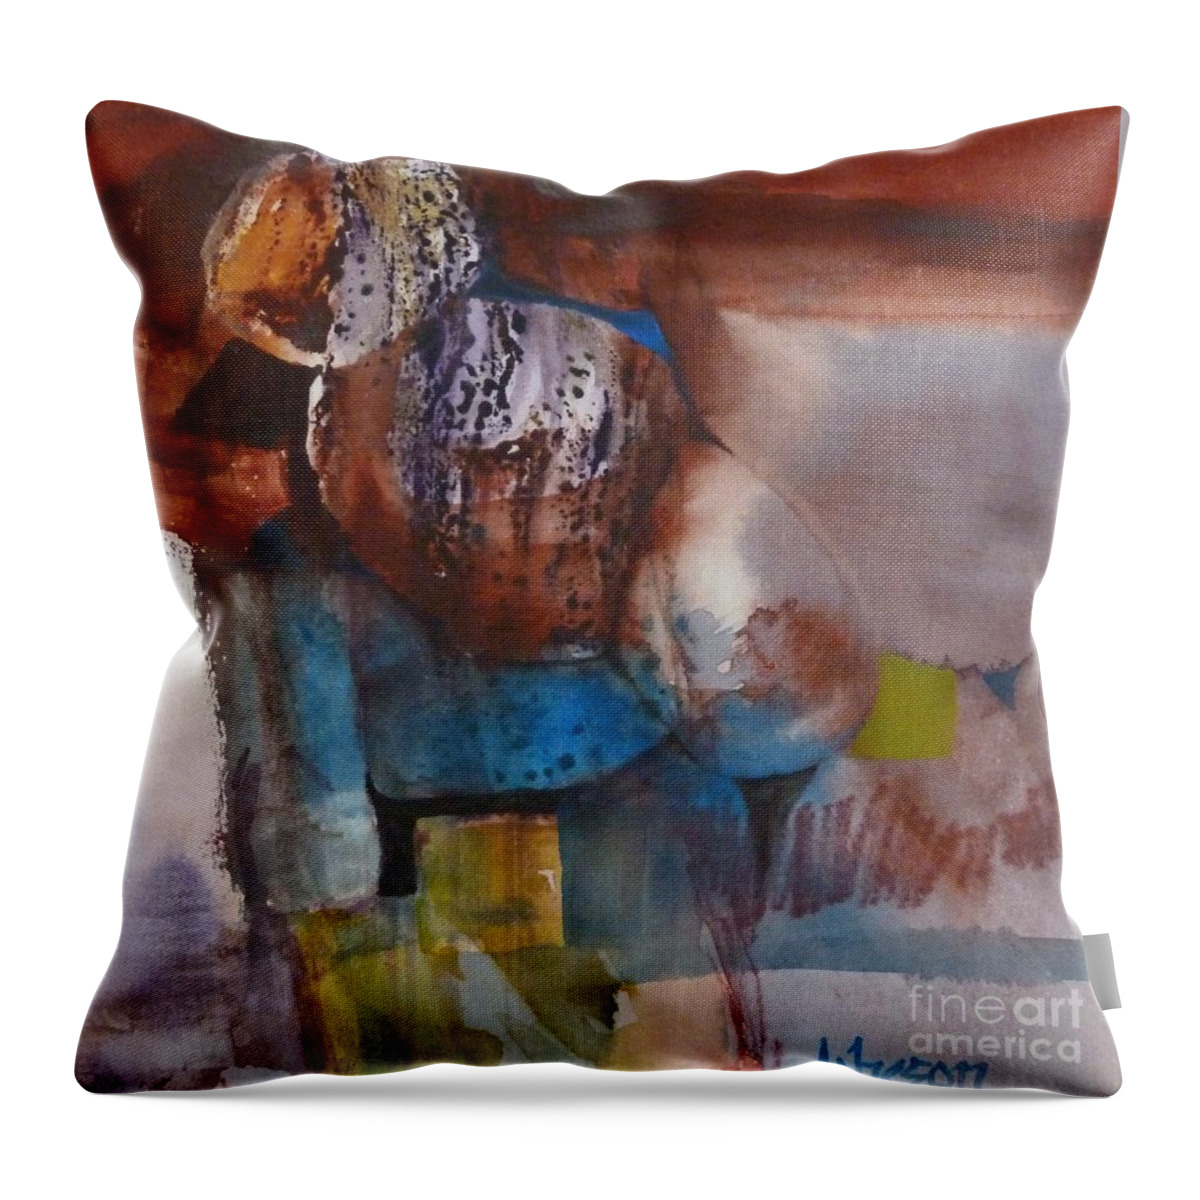 Ombres Throw Pillow featuring the painting Little Man by Donna Acheson-Juillet